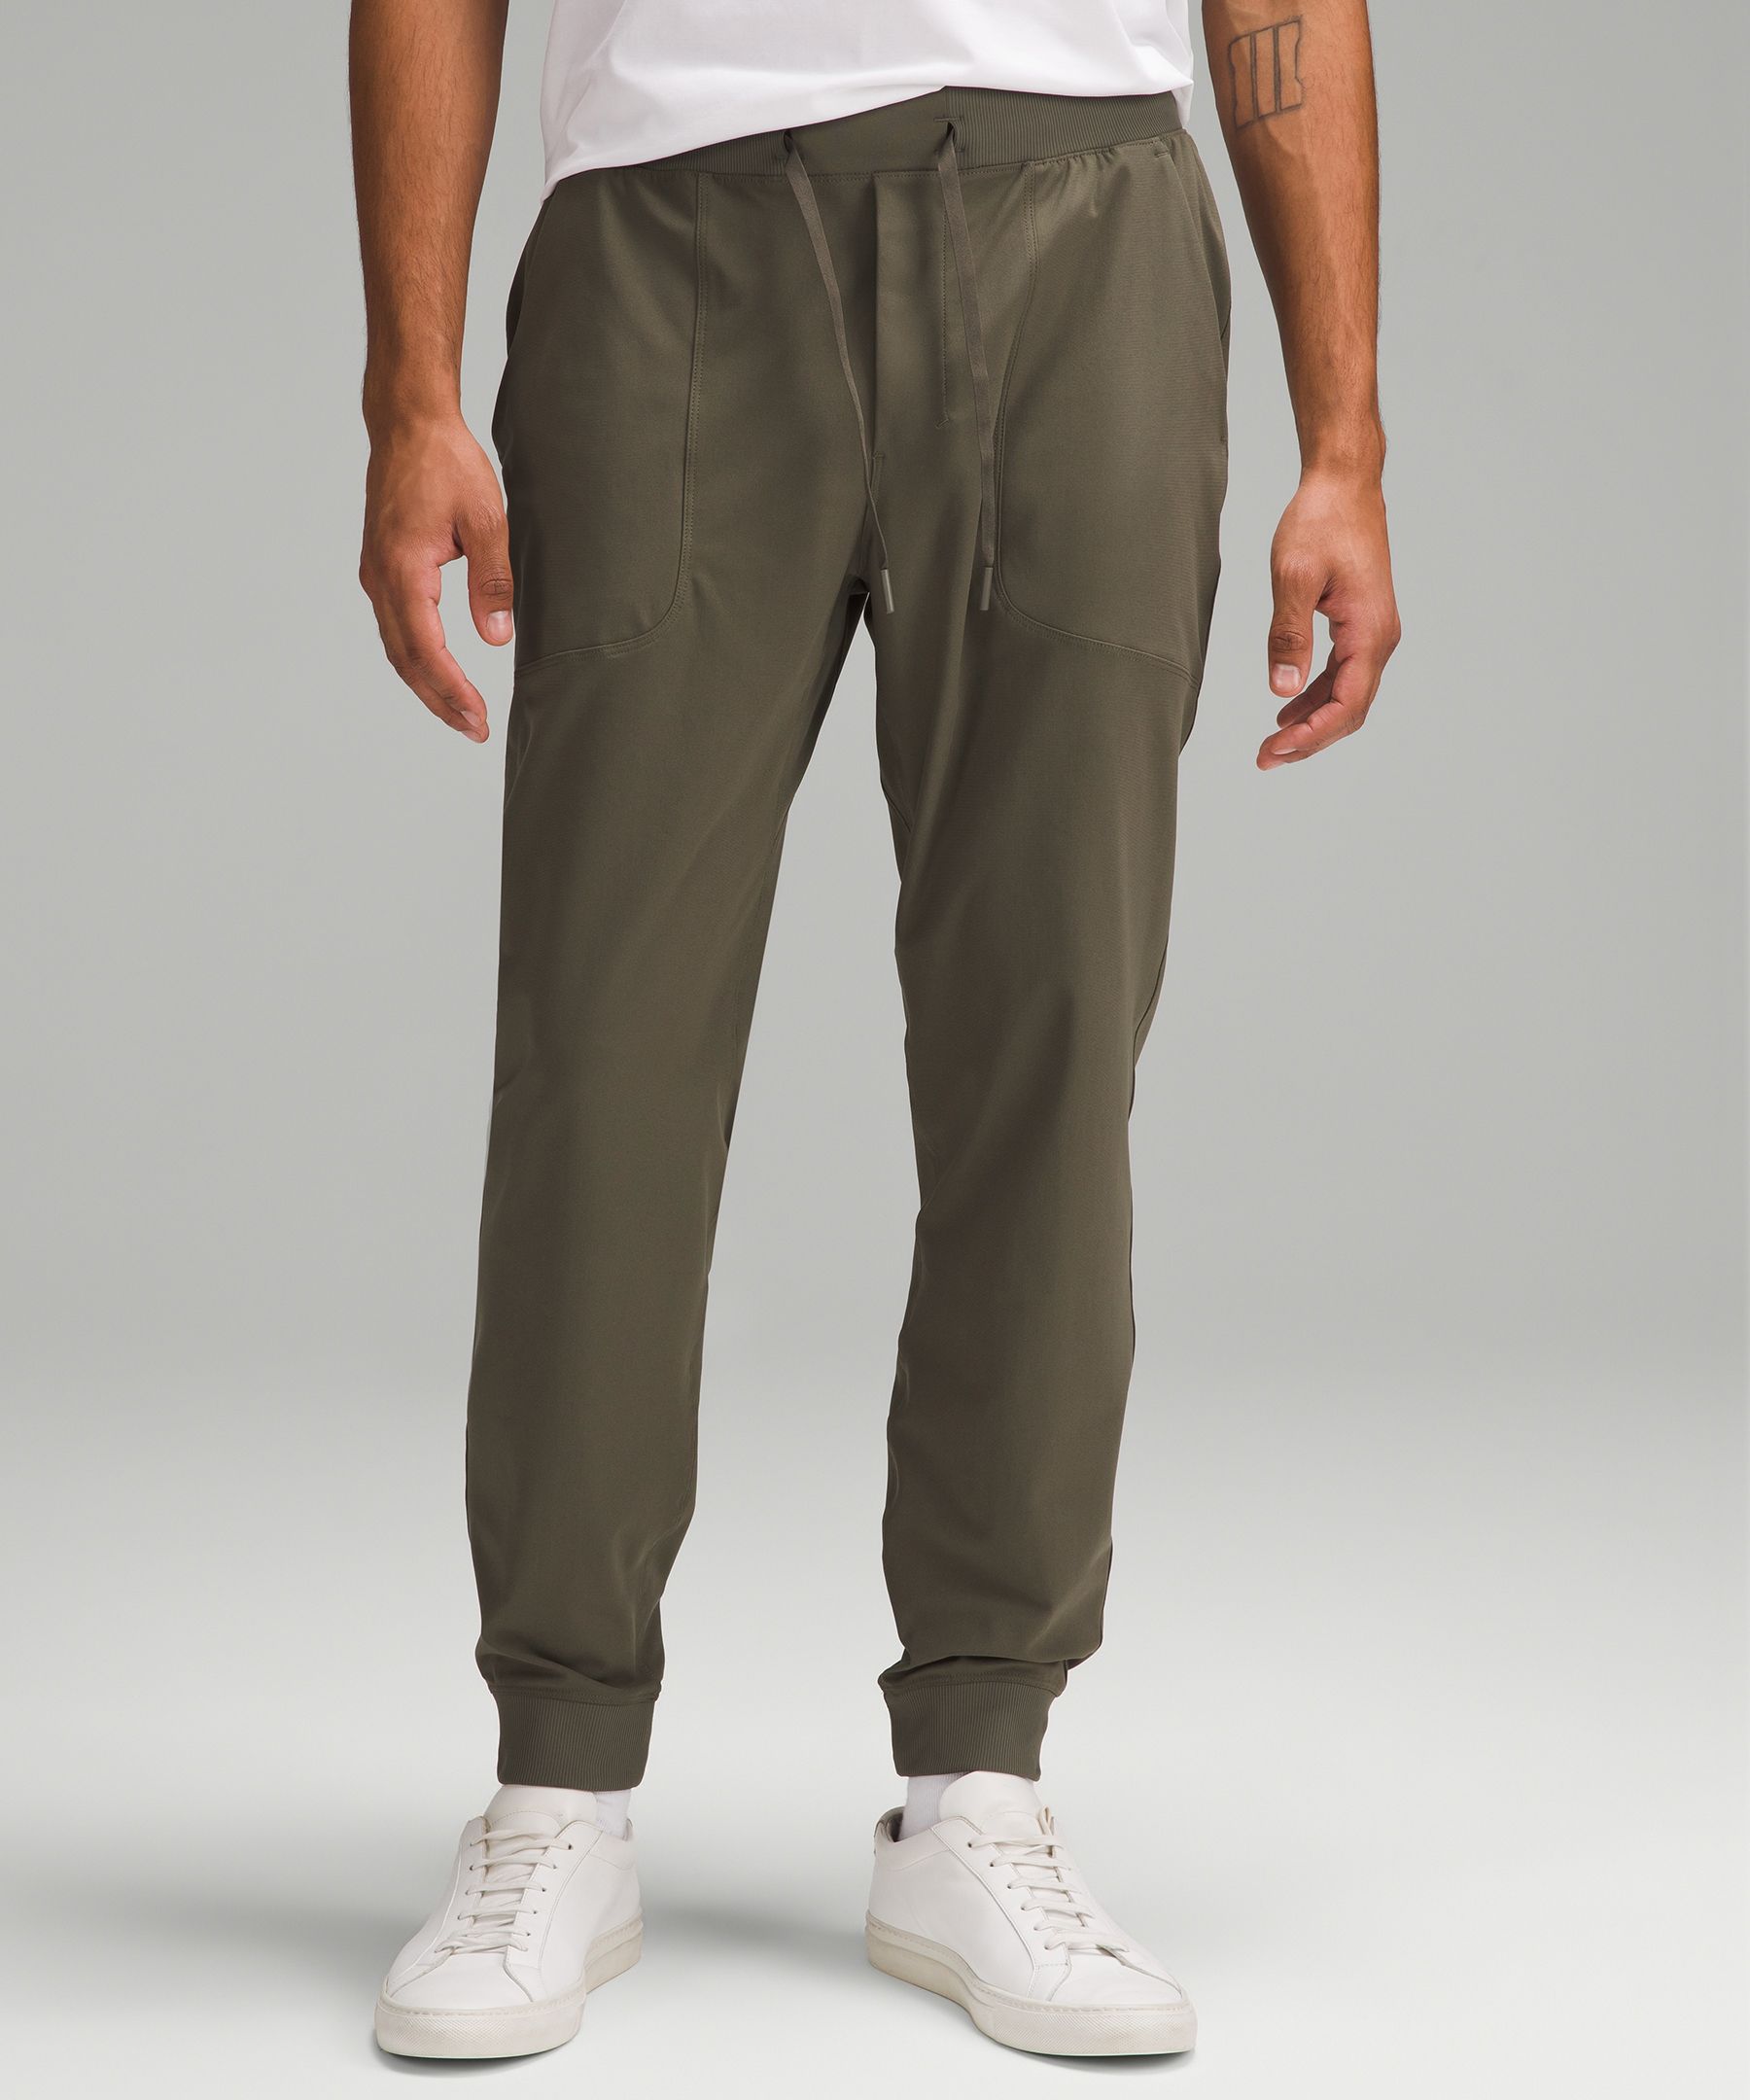 Mens Joggers Similar To Lululemon Athletica  International Society of  Precision Agriculture